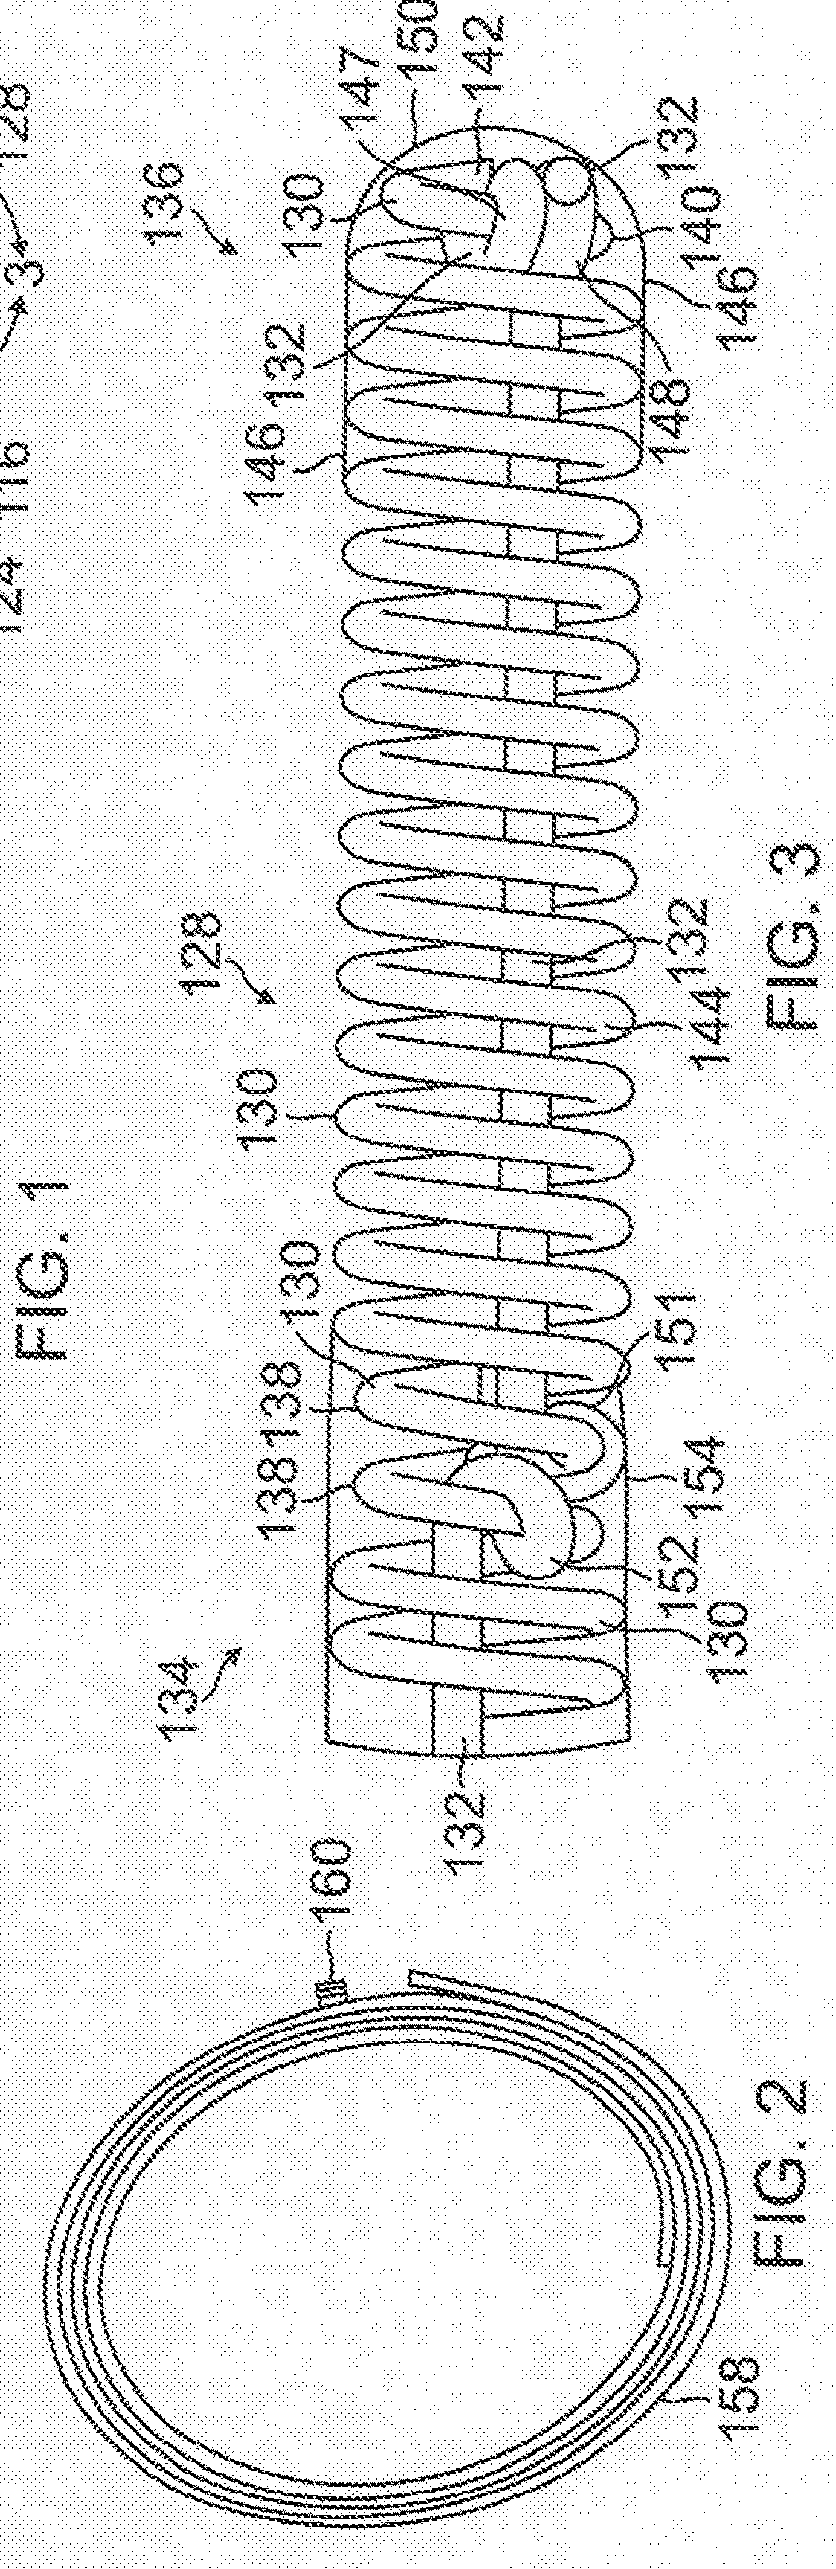 Vascular Implant System and Processes with Flexible Detachment Zones